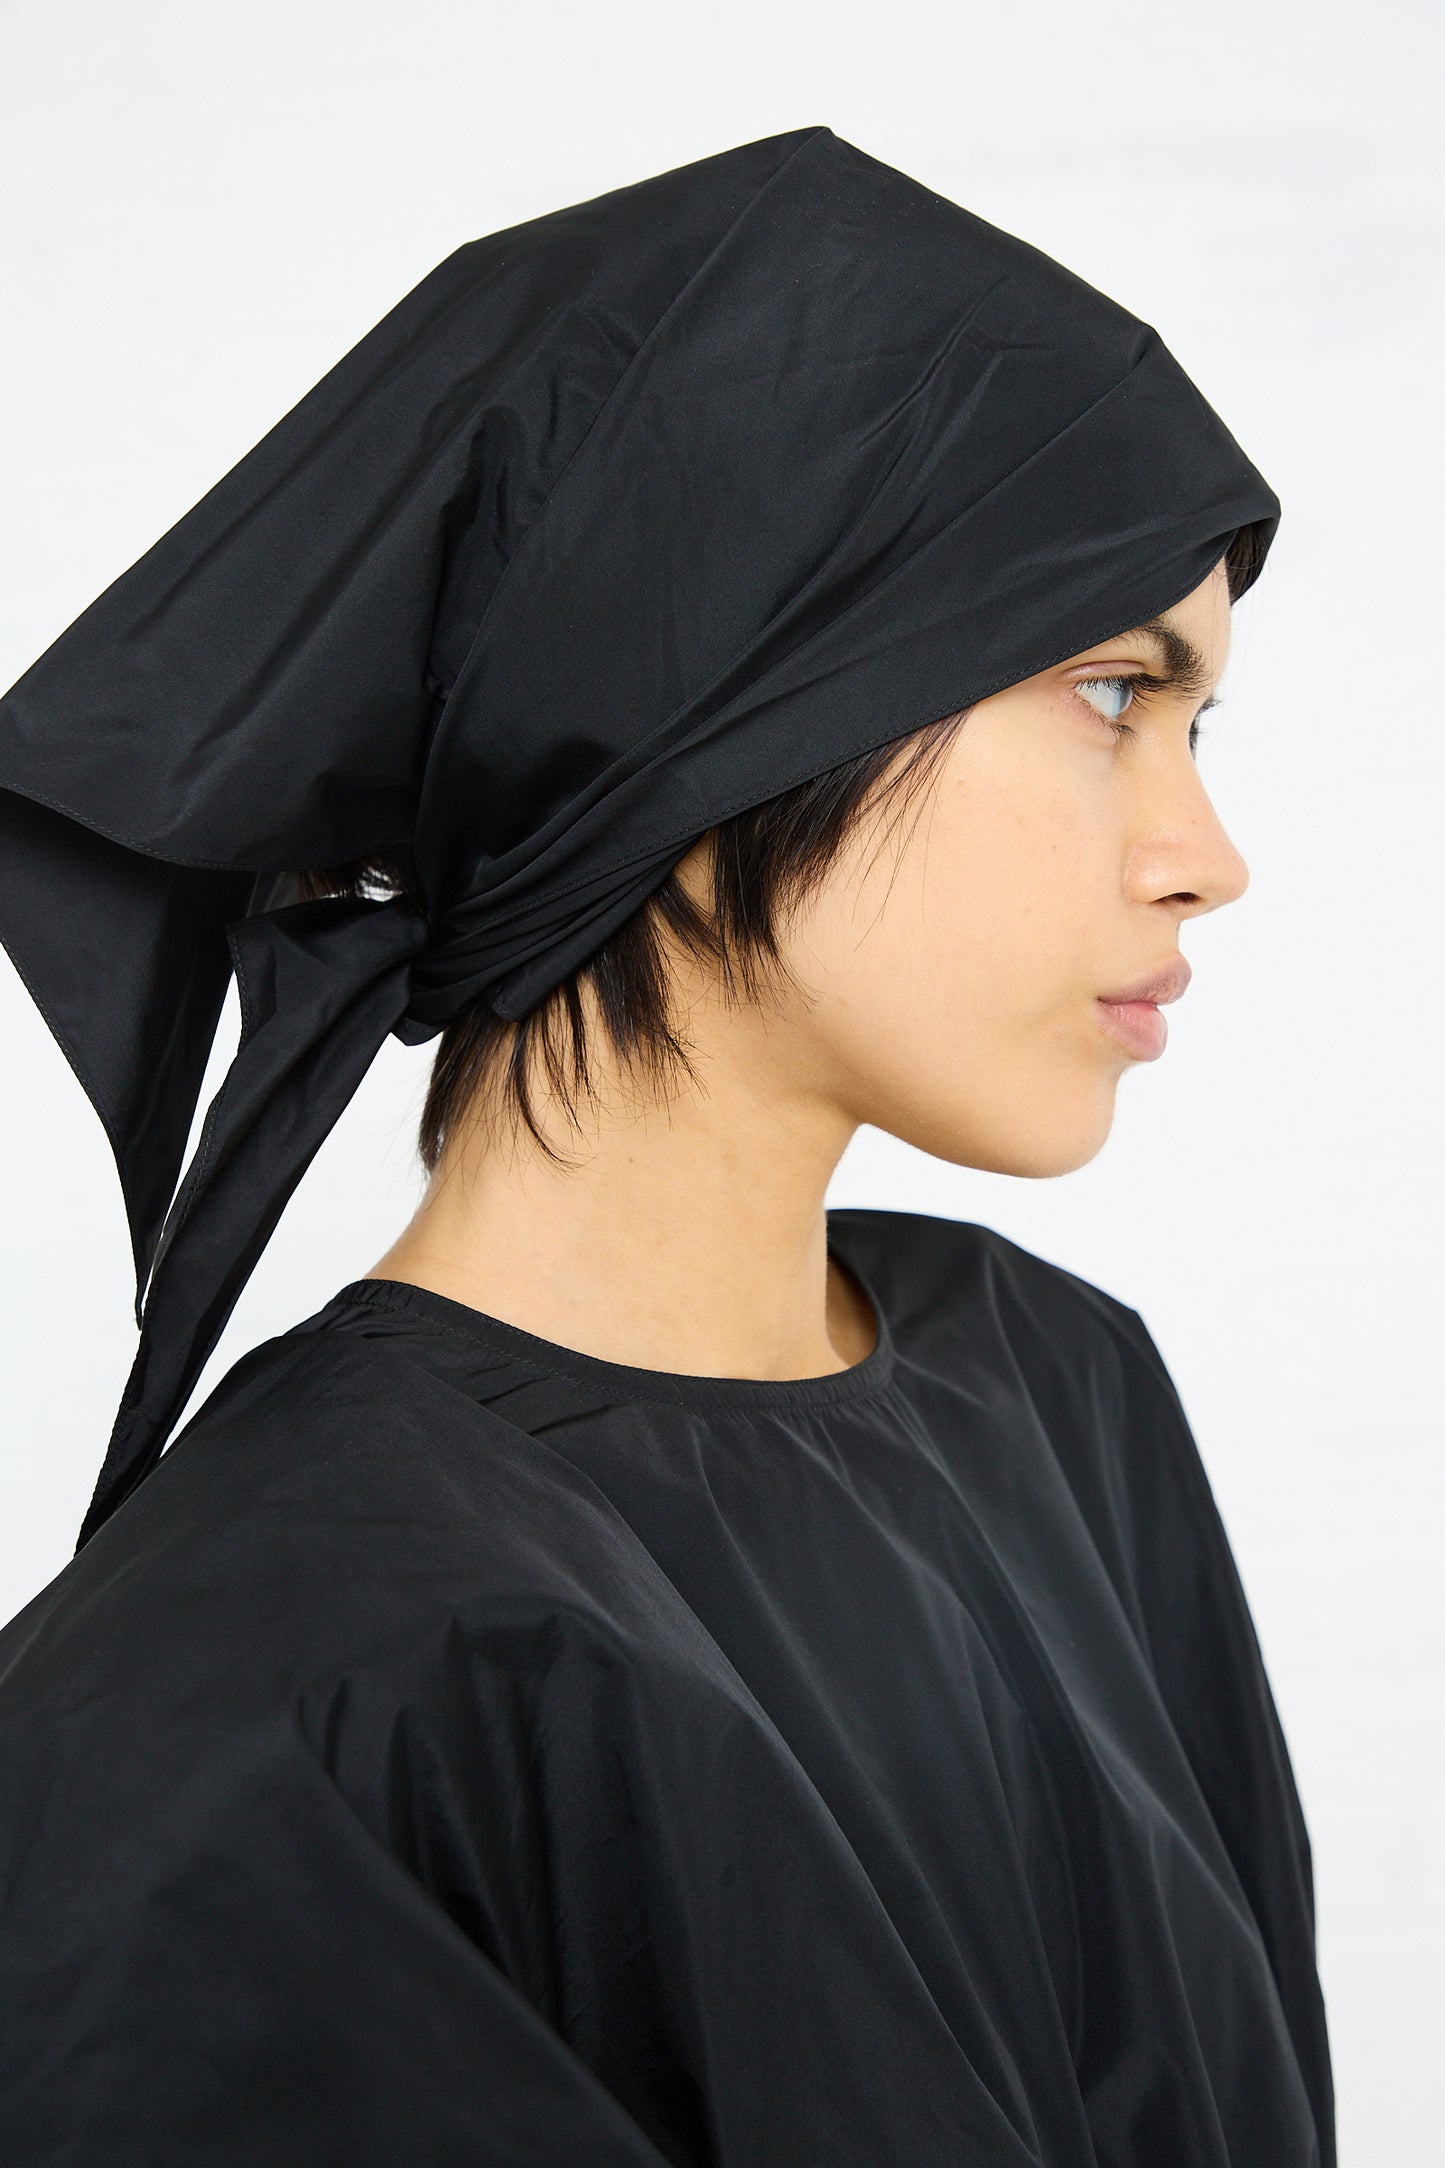 Profile view of a person wearing a Sofie D'Hoore Duke Dress with Lace Hem in Black headscarf and garment crafted from polyester taffeta against a white background.